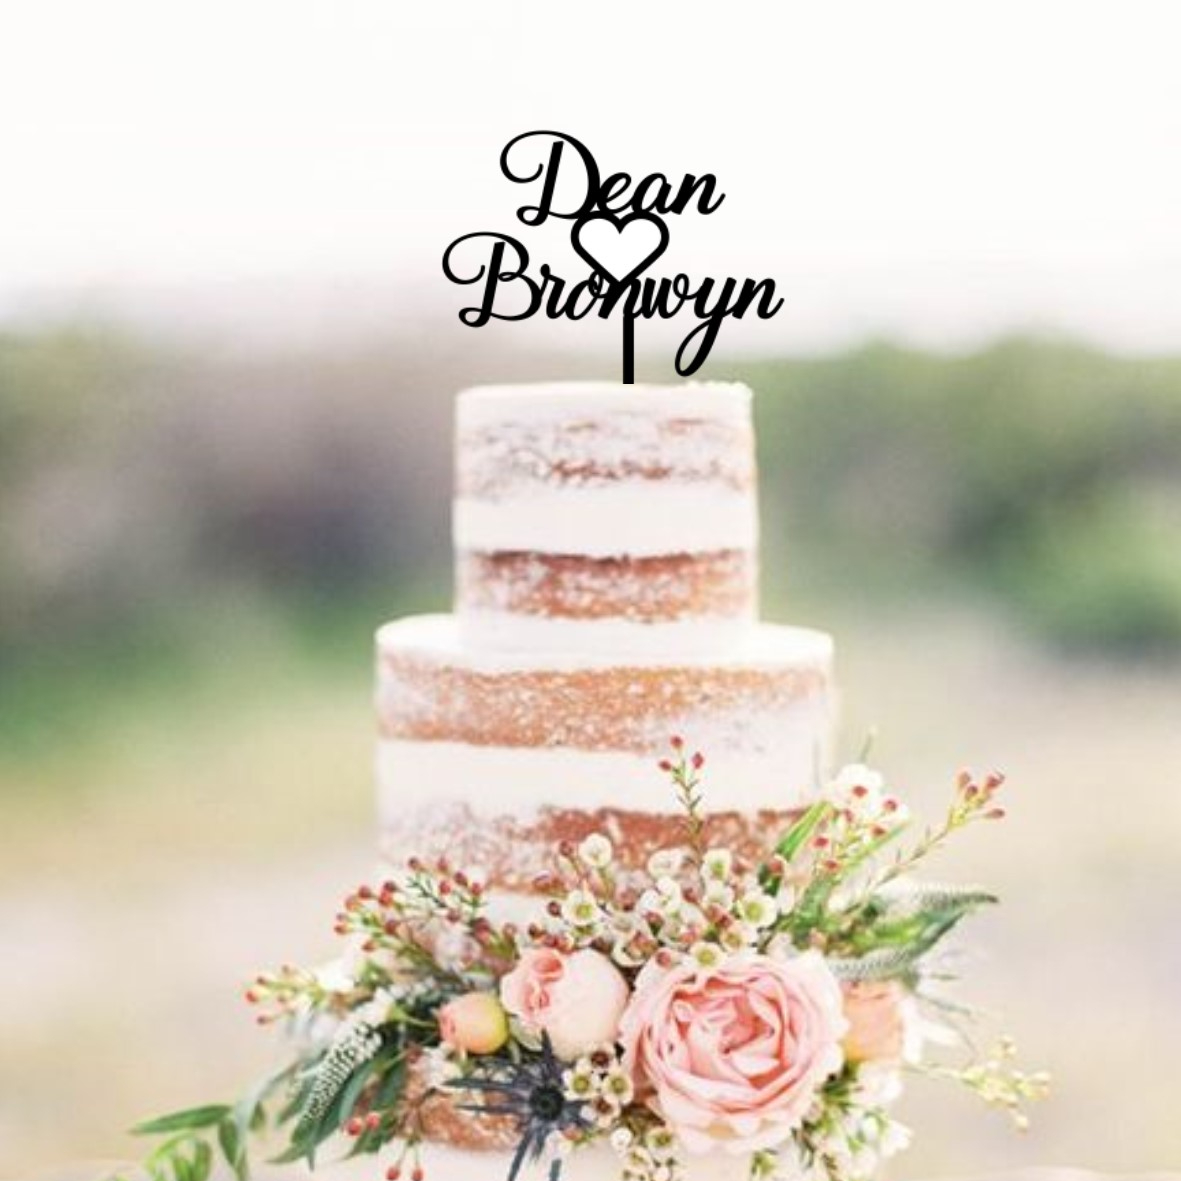 Quick Creations Cake Topper - Deon & Bronwyn